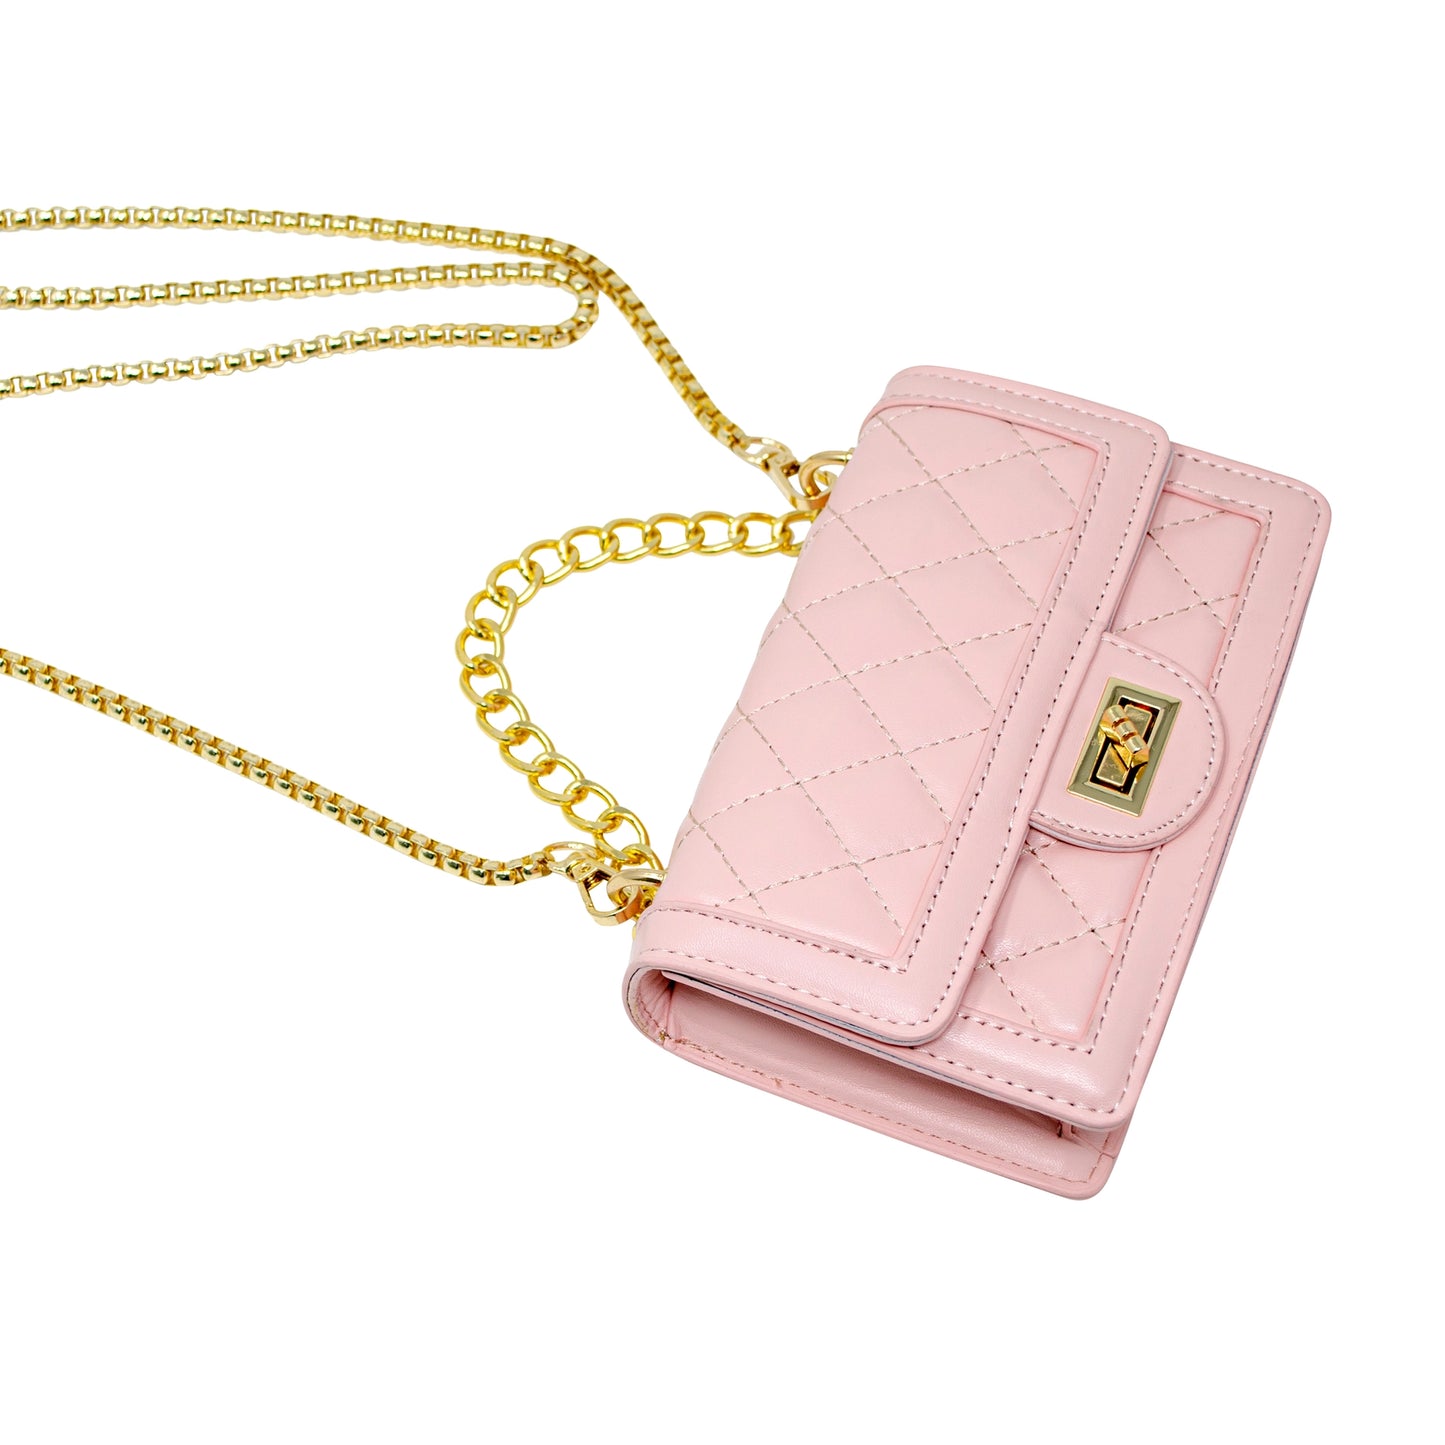 Classic Quilted Large Flap Handbag - Pink